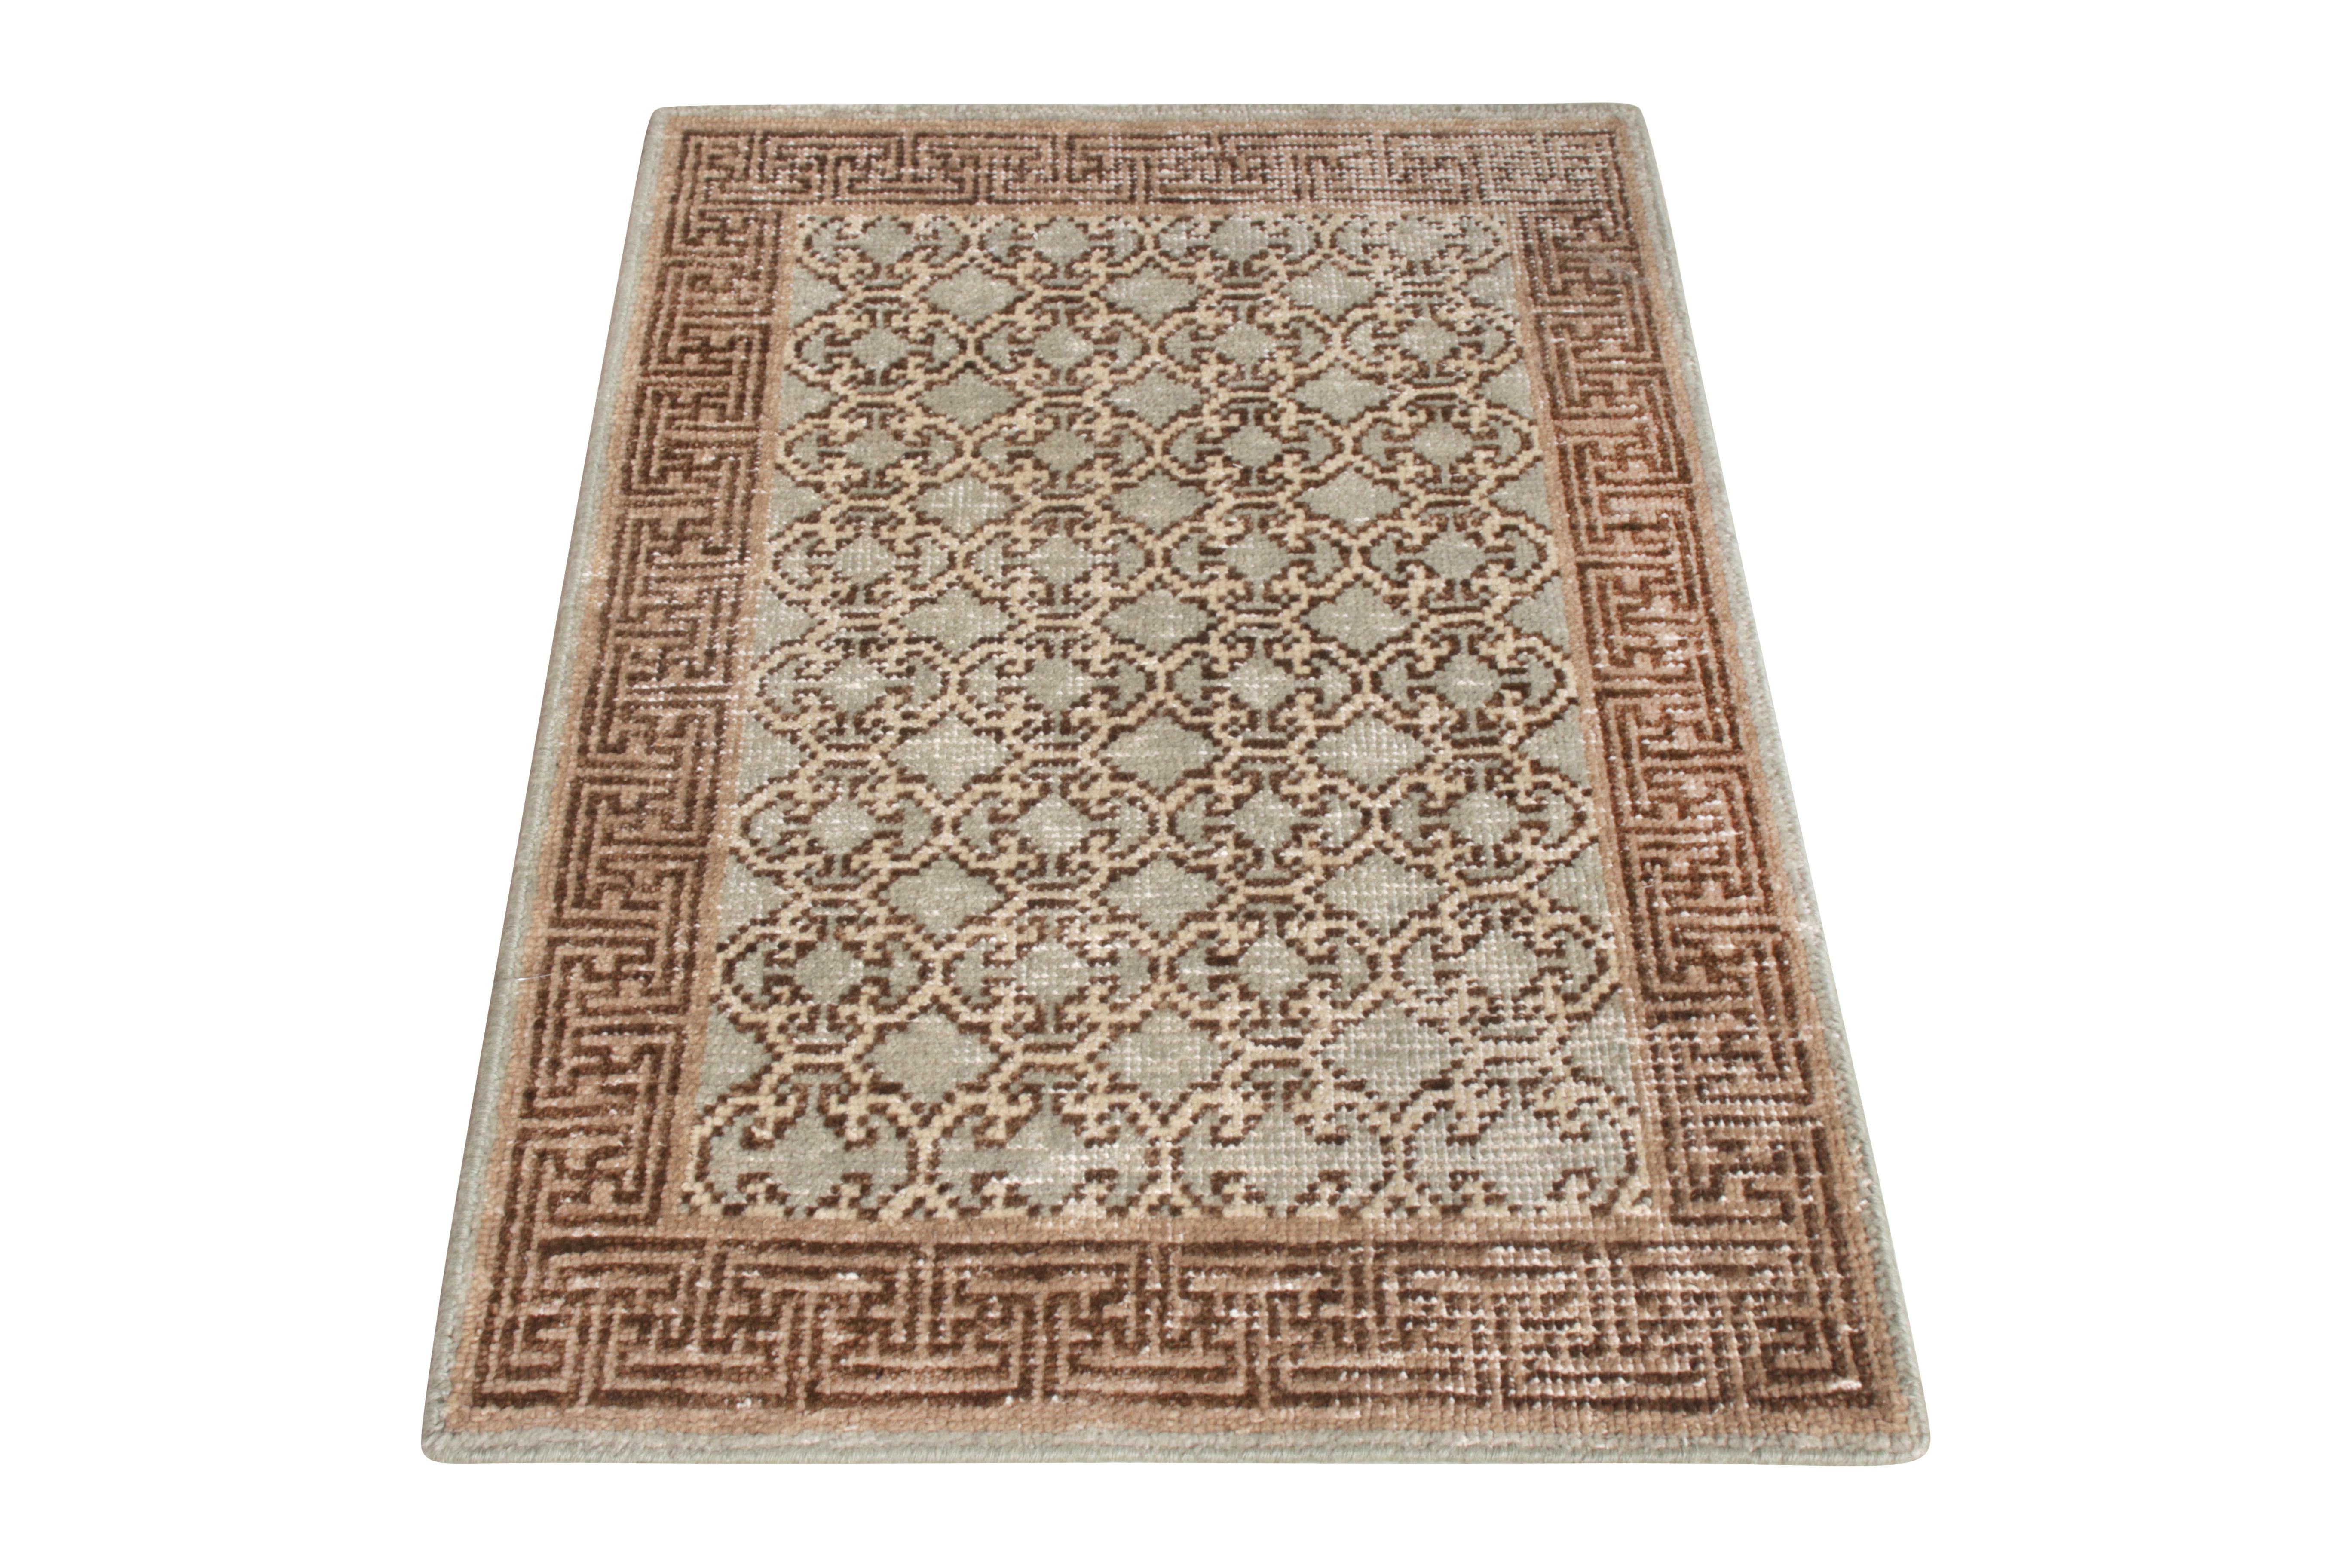 Inspired by Classic Khotan rugs, this collectible is a sophisticated addition to Rug & Kilim’s Homage Collection. This modern take on classical rugs witnesses the marriage of a rich design in an enigmatic colour way of grey and brown emanating a